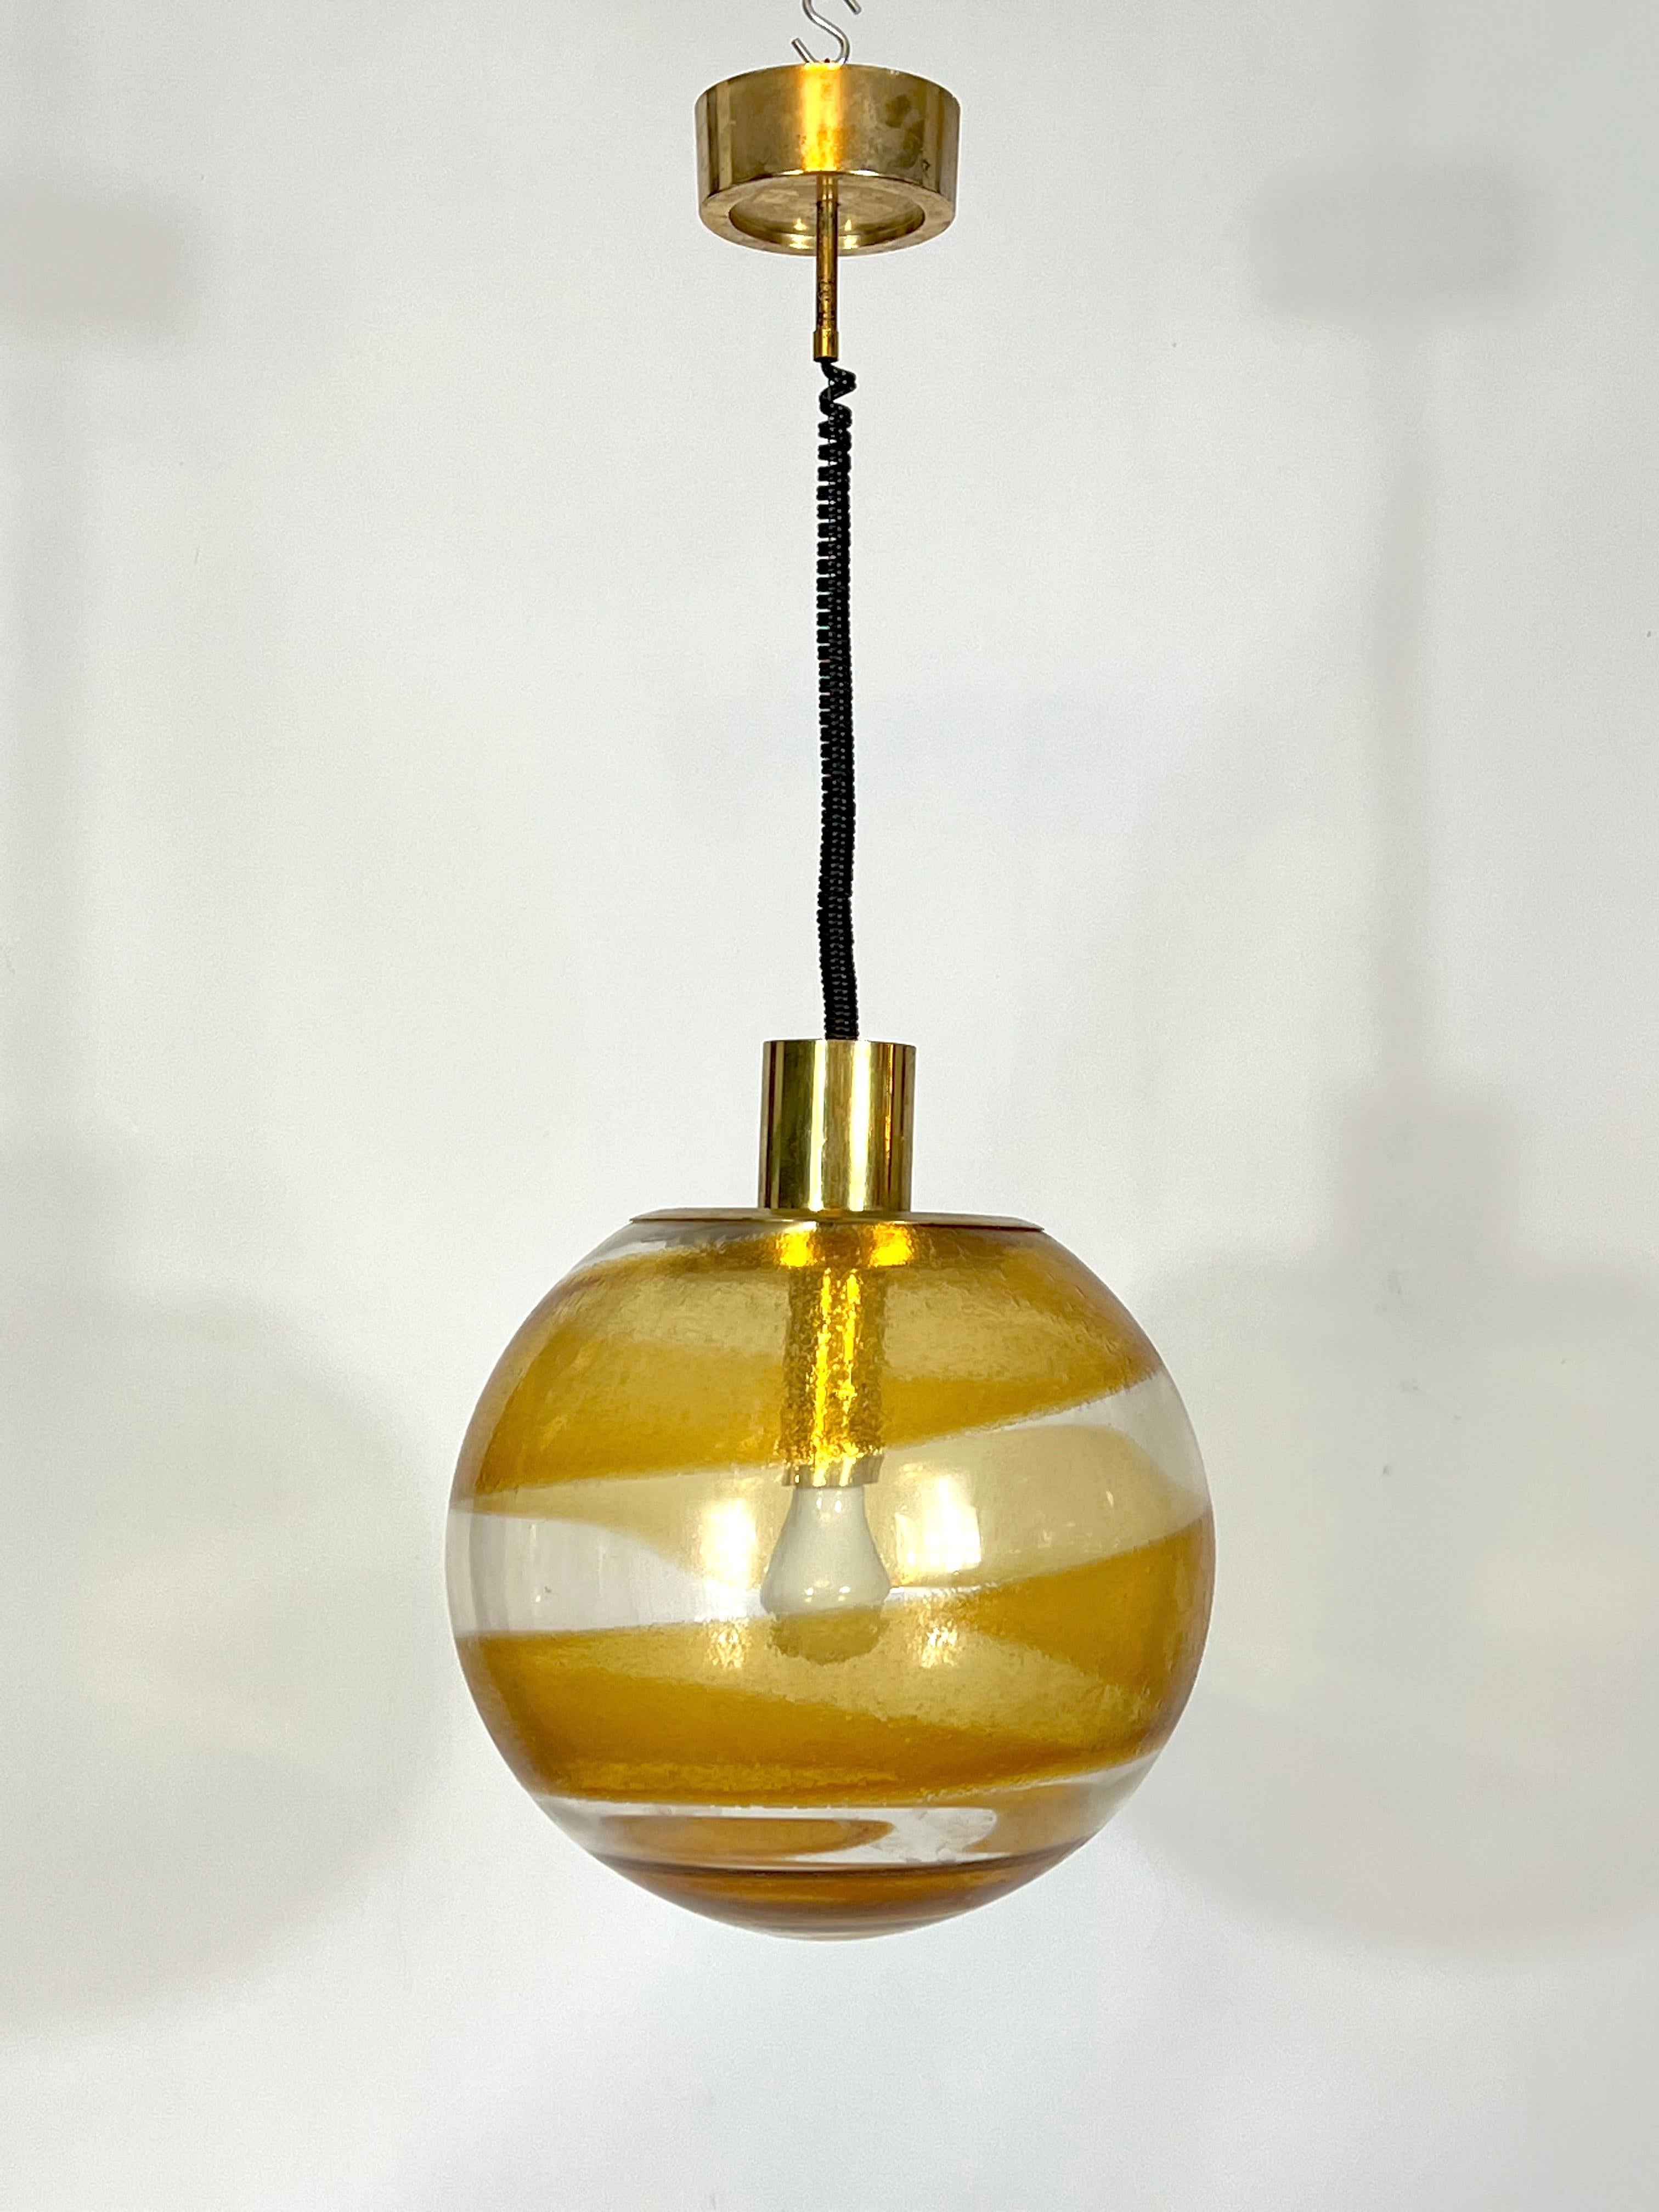 Good vintage condition for this pendant lamp made from Murano glass and brass. Full working with EU standard, adaptable on demand for USA standard.